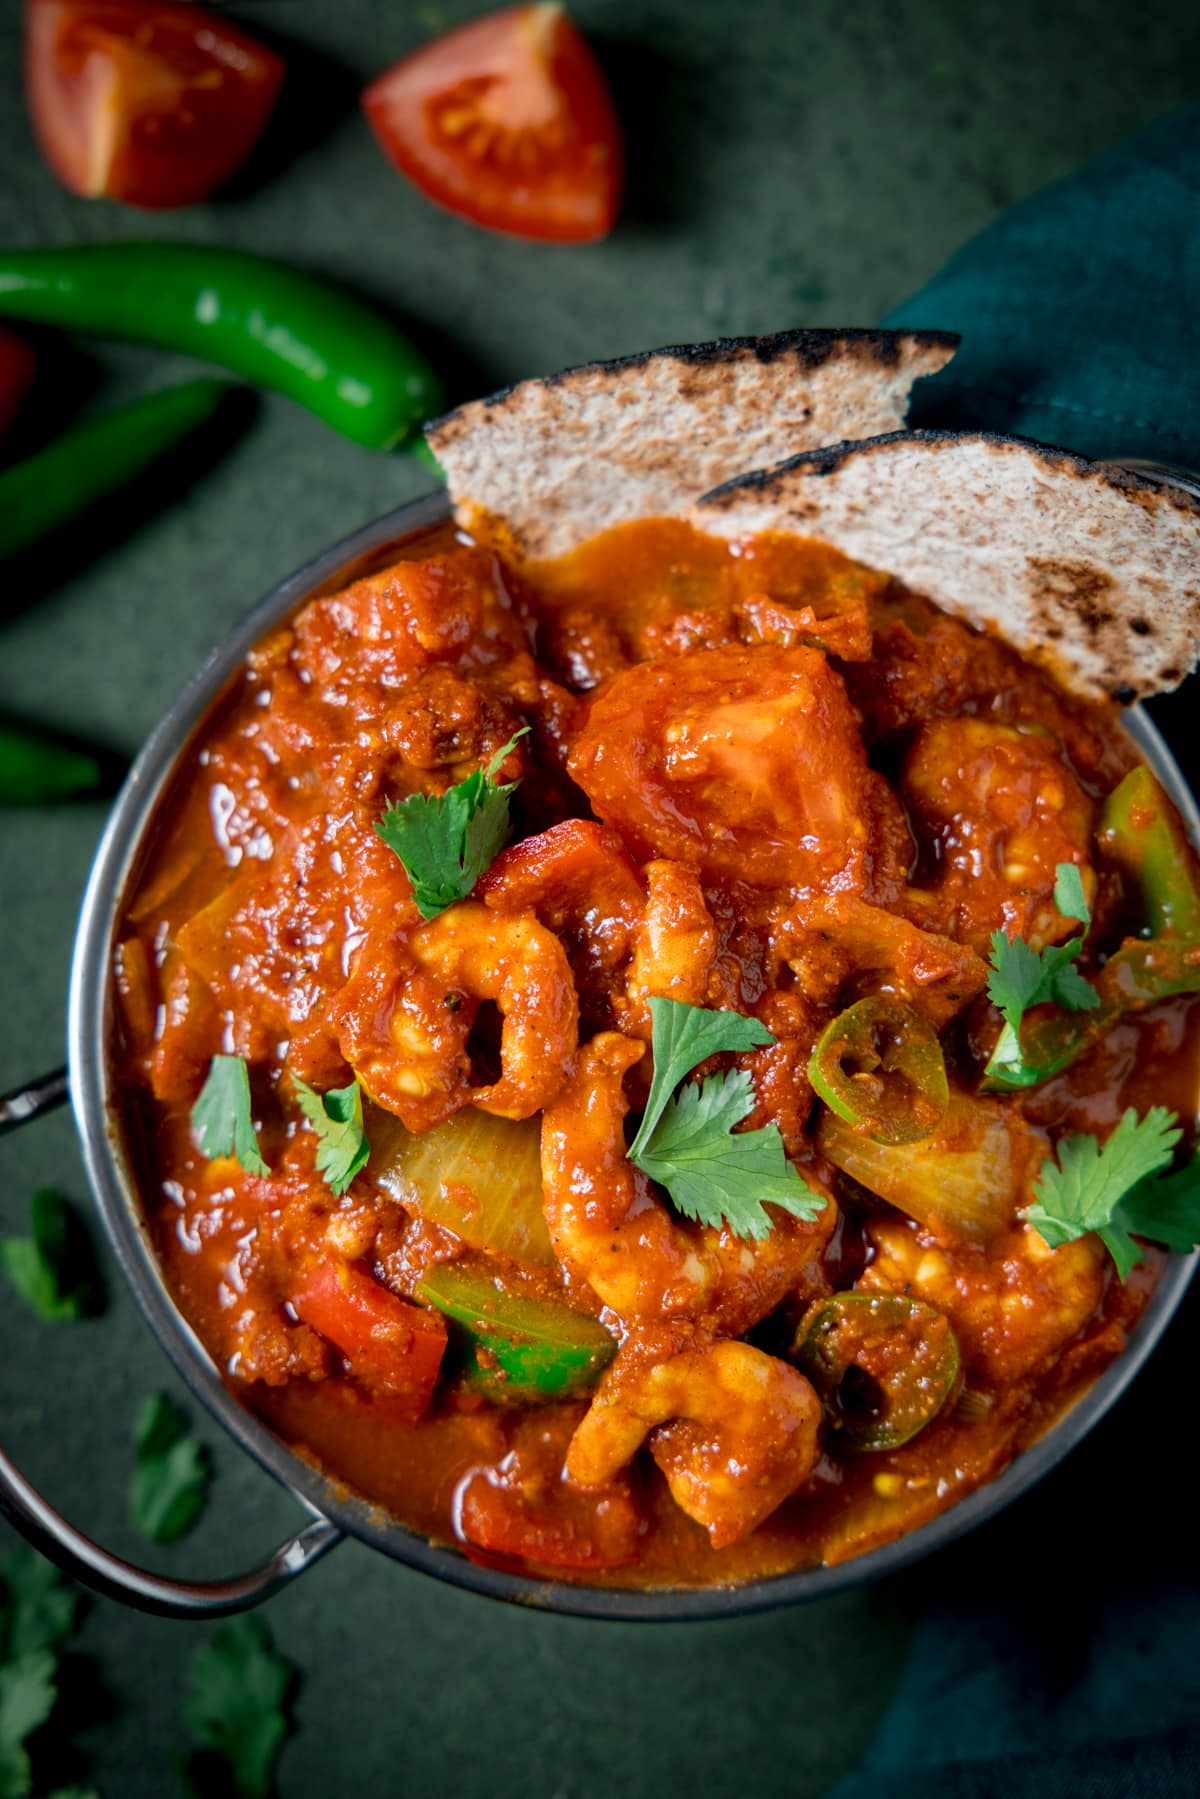 Close up picture of a prawn balti in a balti dish on a green background.